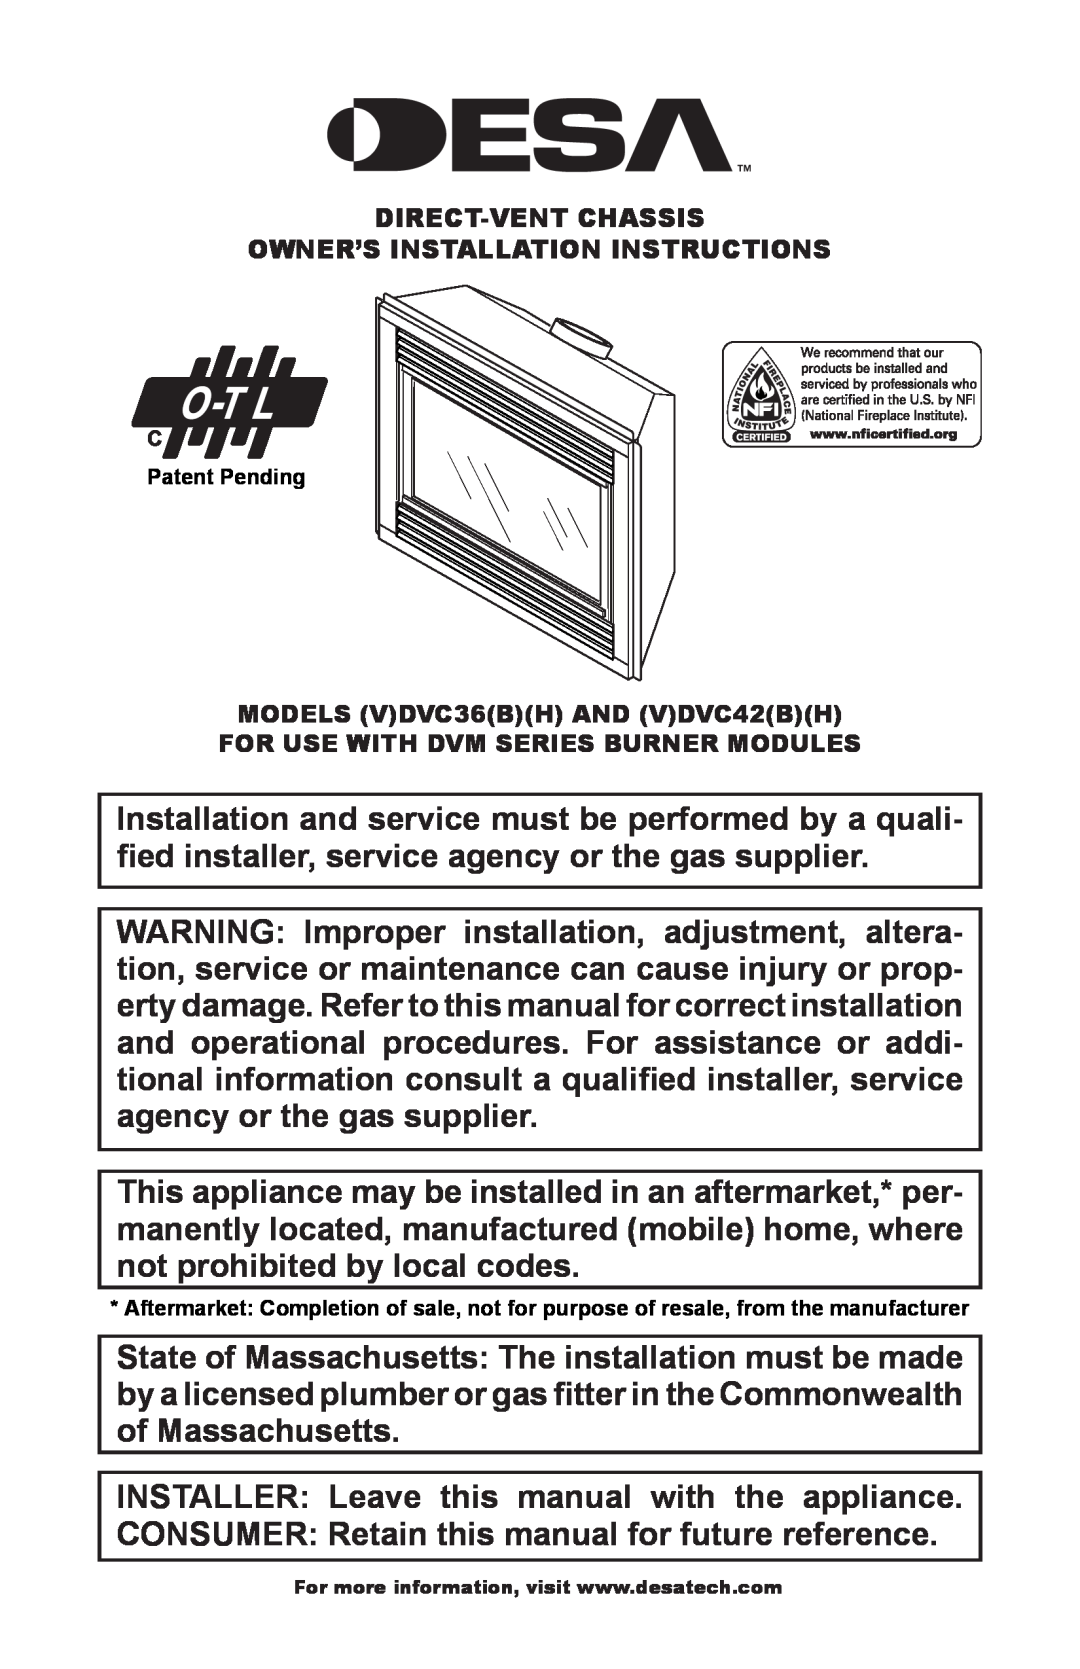 Desa (V)DVC36(B)(H), (V)DVC42(B)(H) installation instructions INSTALLER Leave this manual with the appliance 